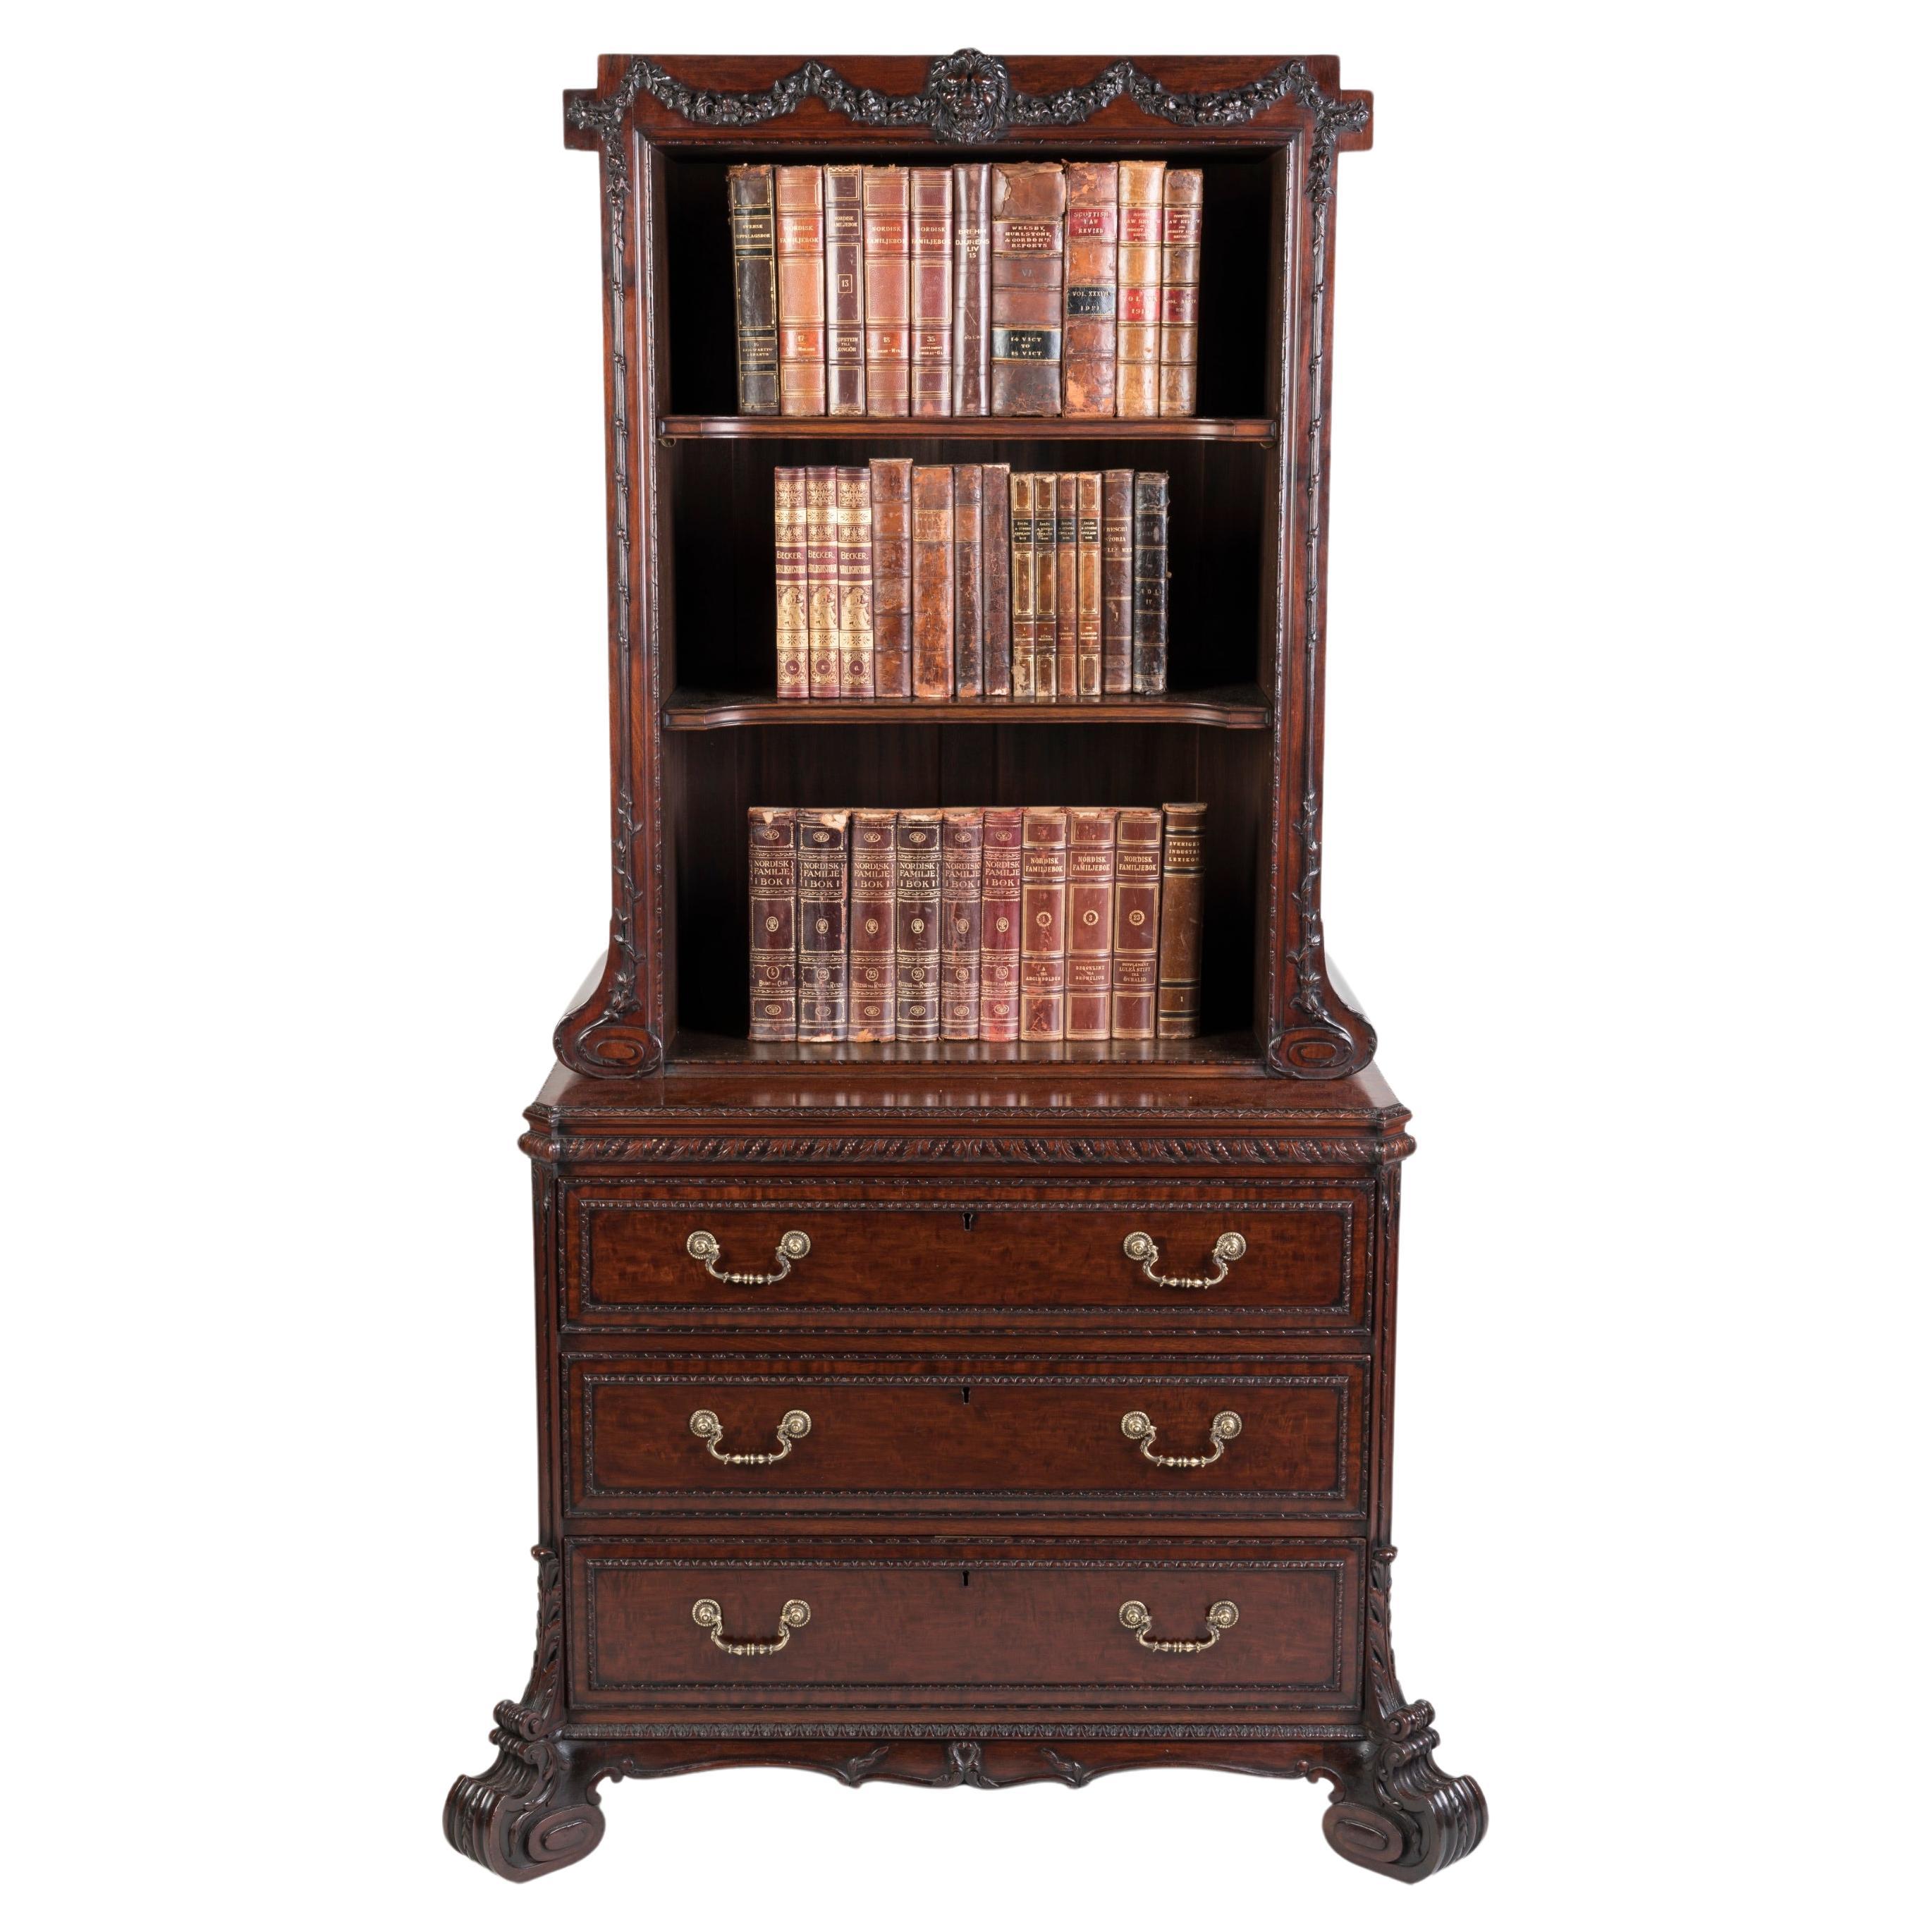 19th Century Carved Mahogany Cabinet Bookcase by H. Samuel in the Georgian Style For Sale